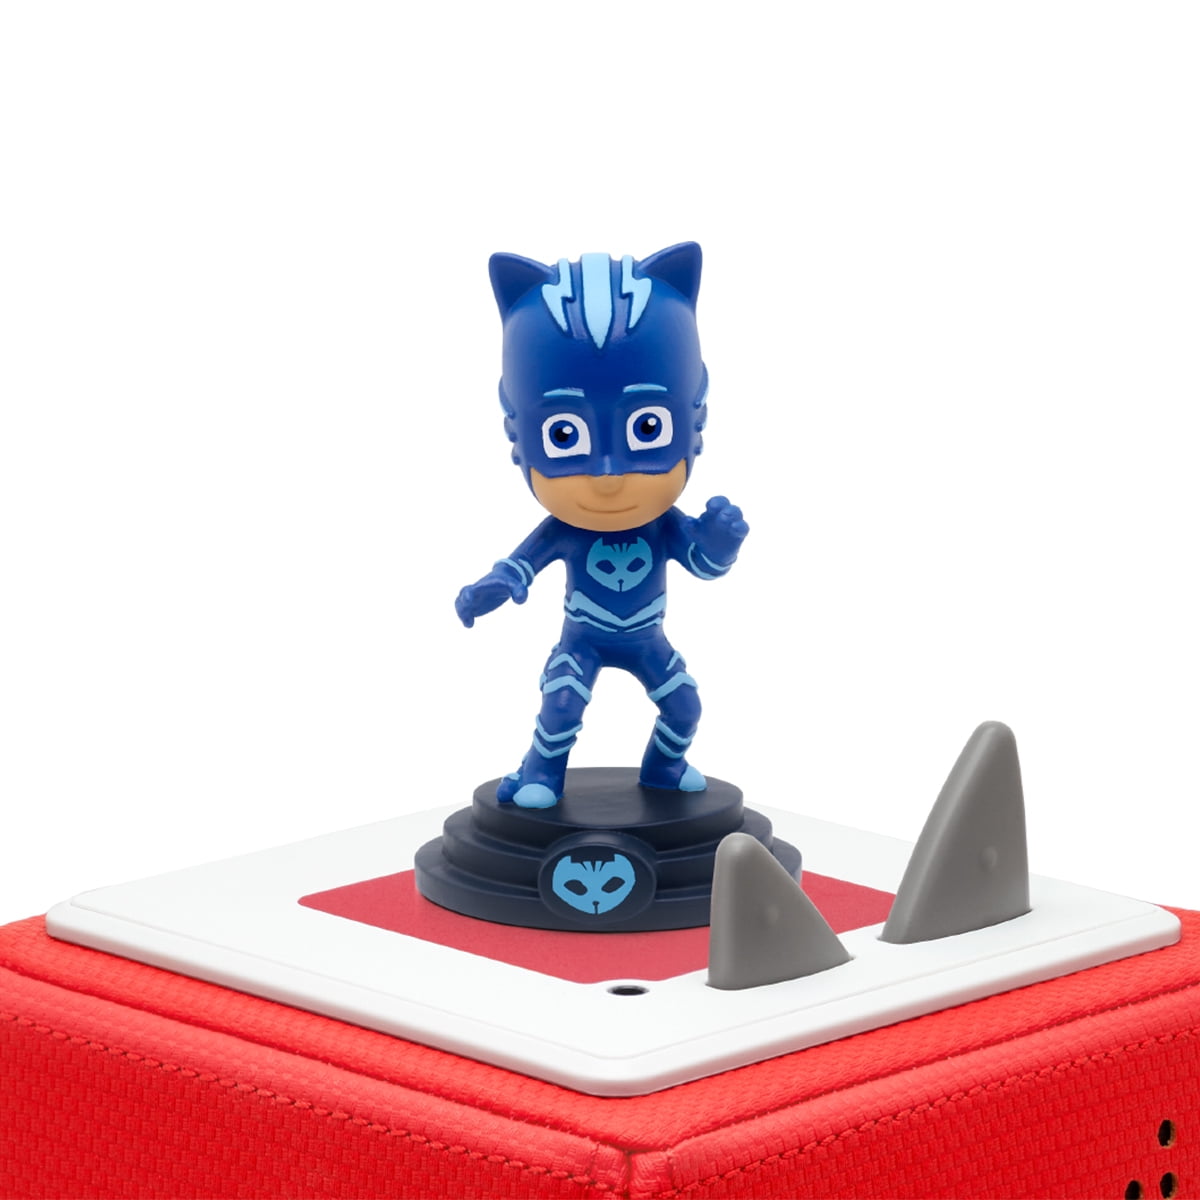 Tonies catboy from pj masks audio play figurine for portable speaker small blue plastic